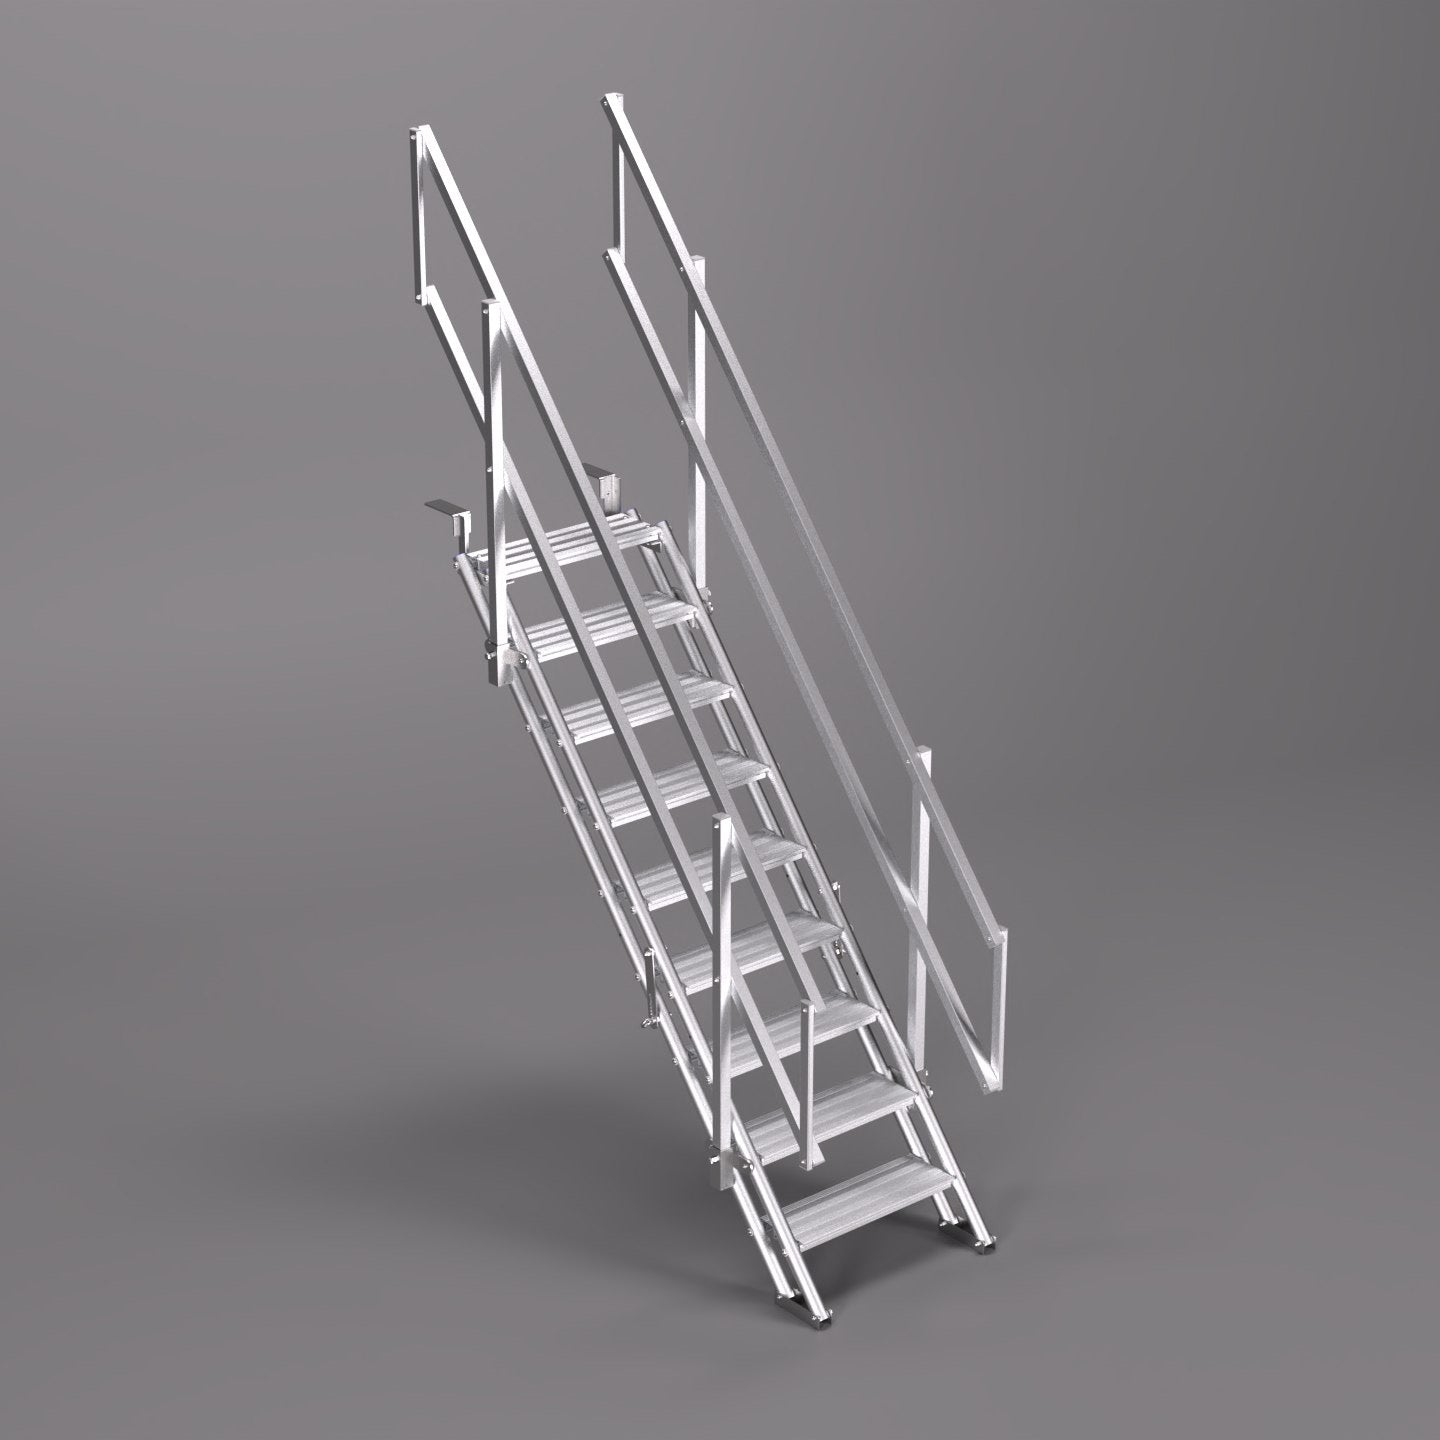 An image of a 2.0m ALTO Universal Stair Set with the flat slab fixing option.